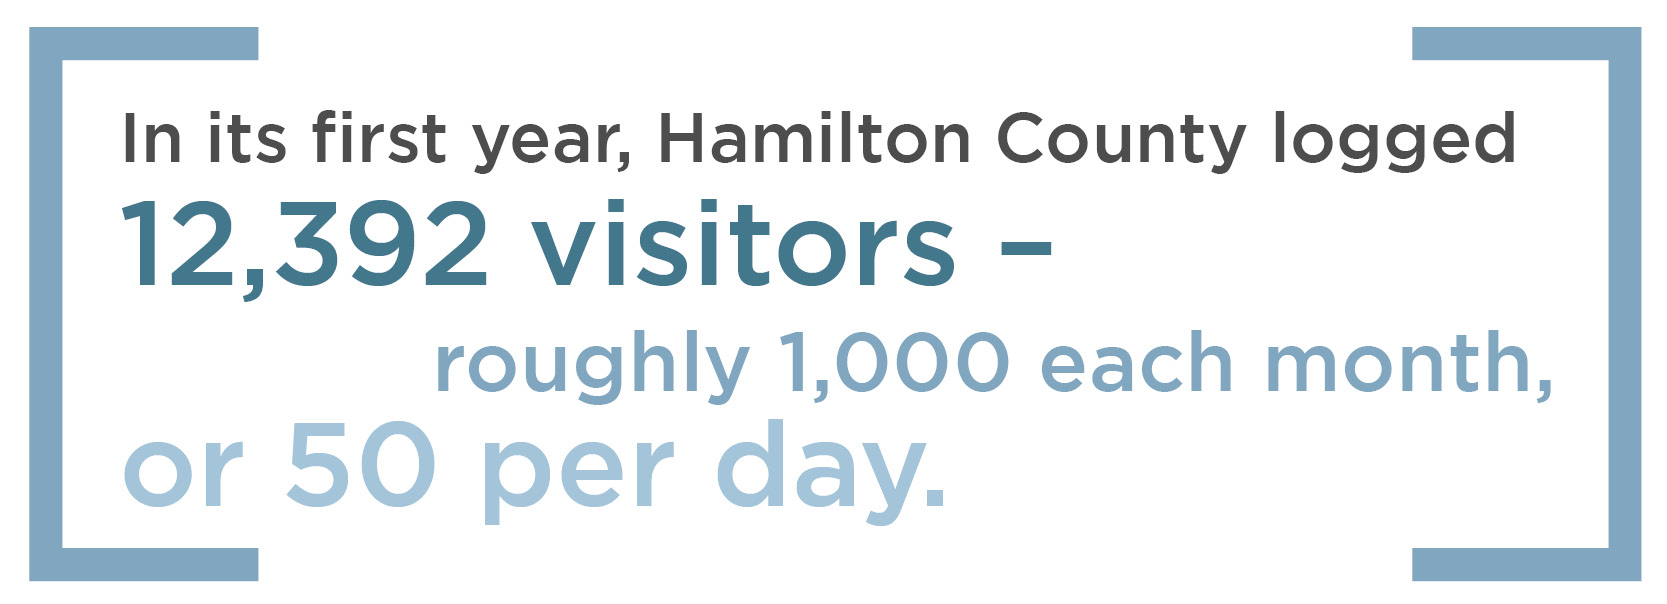 Infographic that reads 'In its first year, Hamilton County logged 12,392 visitors - roughly 1,000 each month, or 50 per day.'